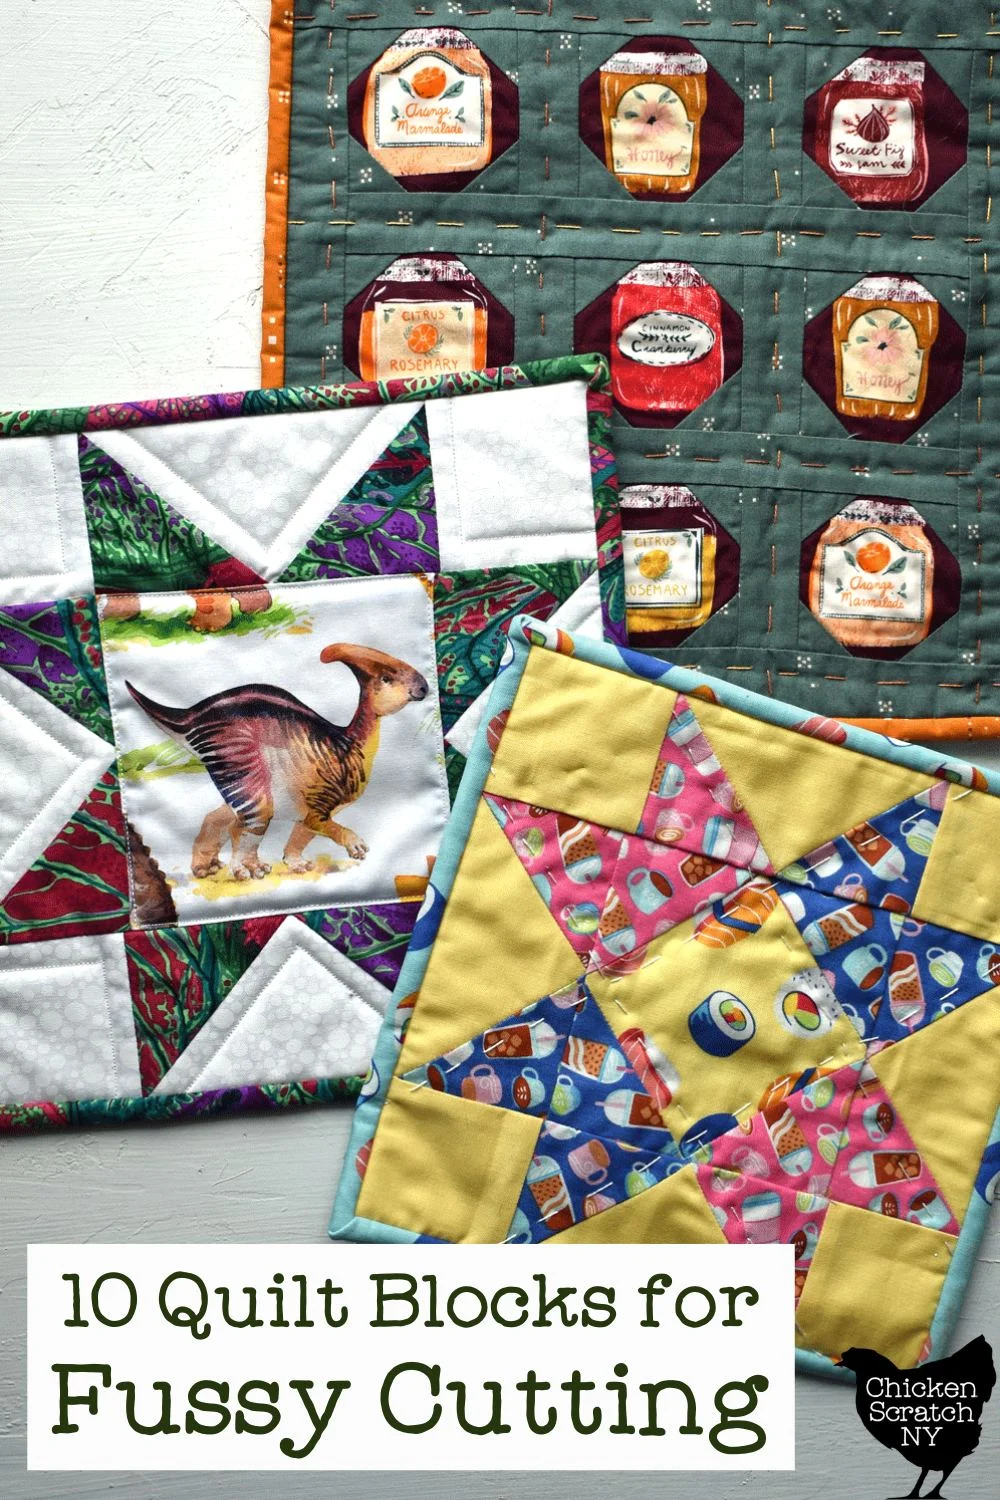 Thinking outside the quilt block